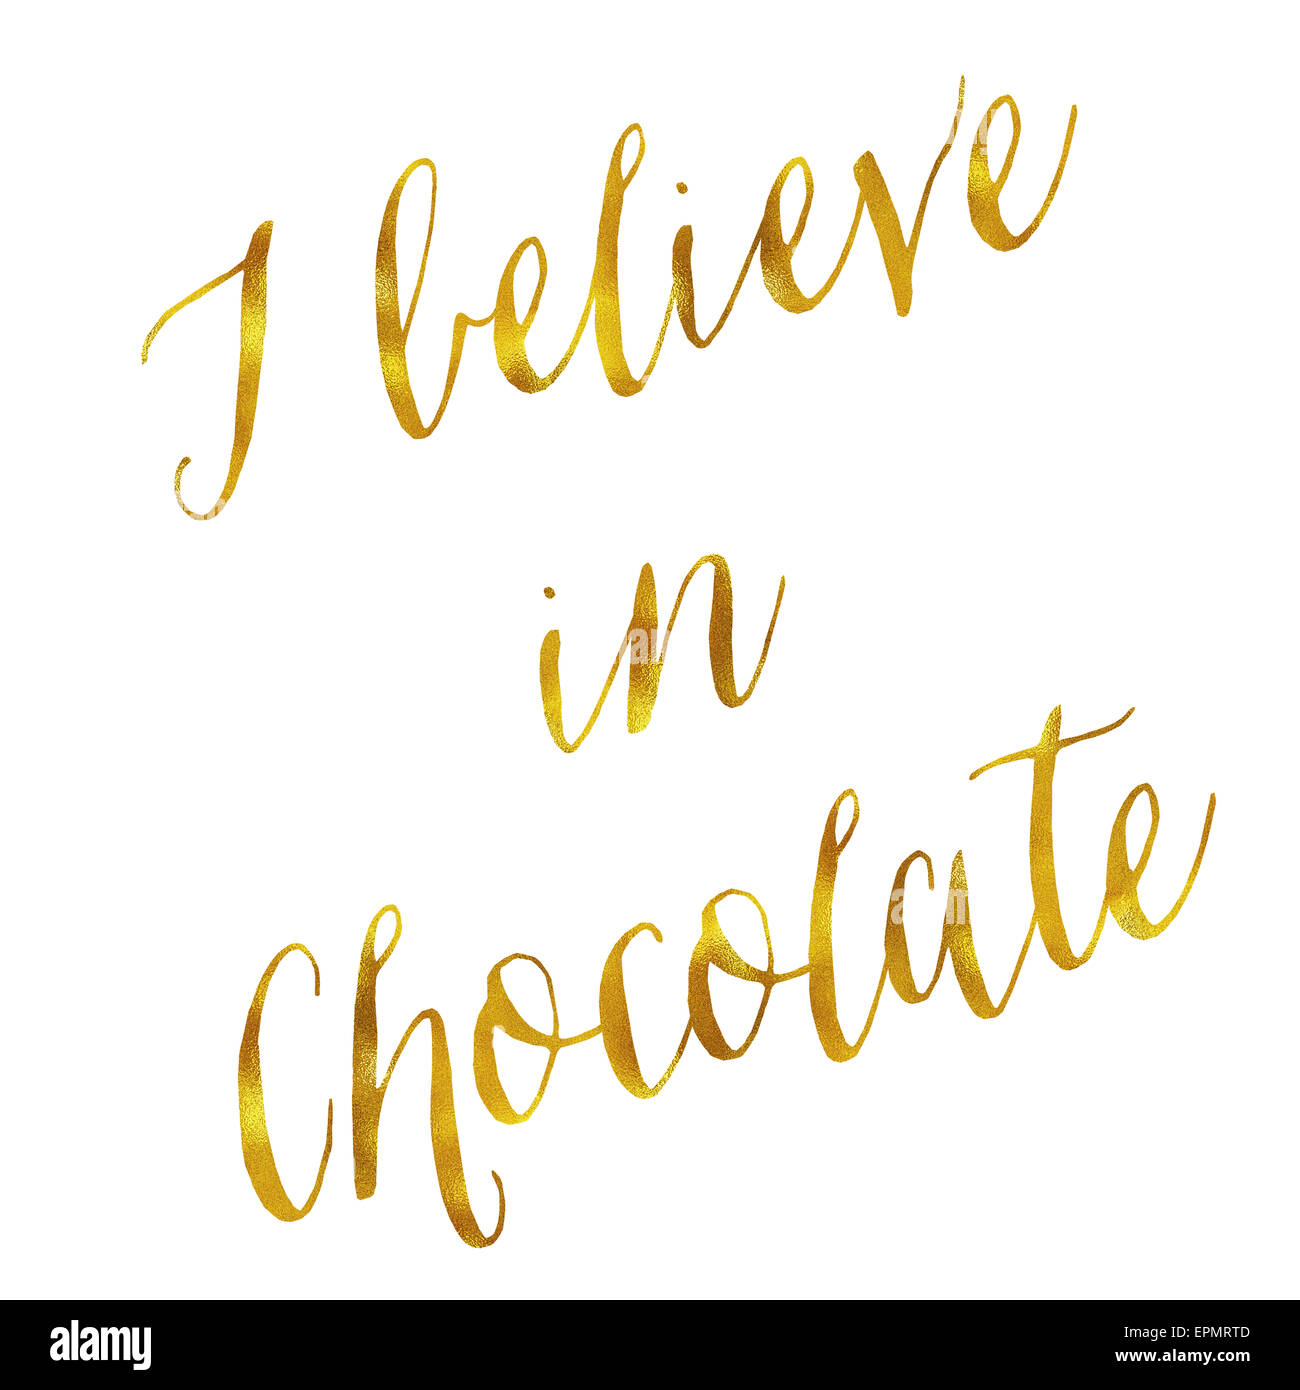 I Believe In Chocolate Gold Faux Foil Metallic Glitter Quote Isolated on White Background Stock Photo